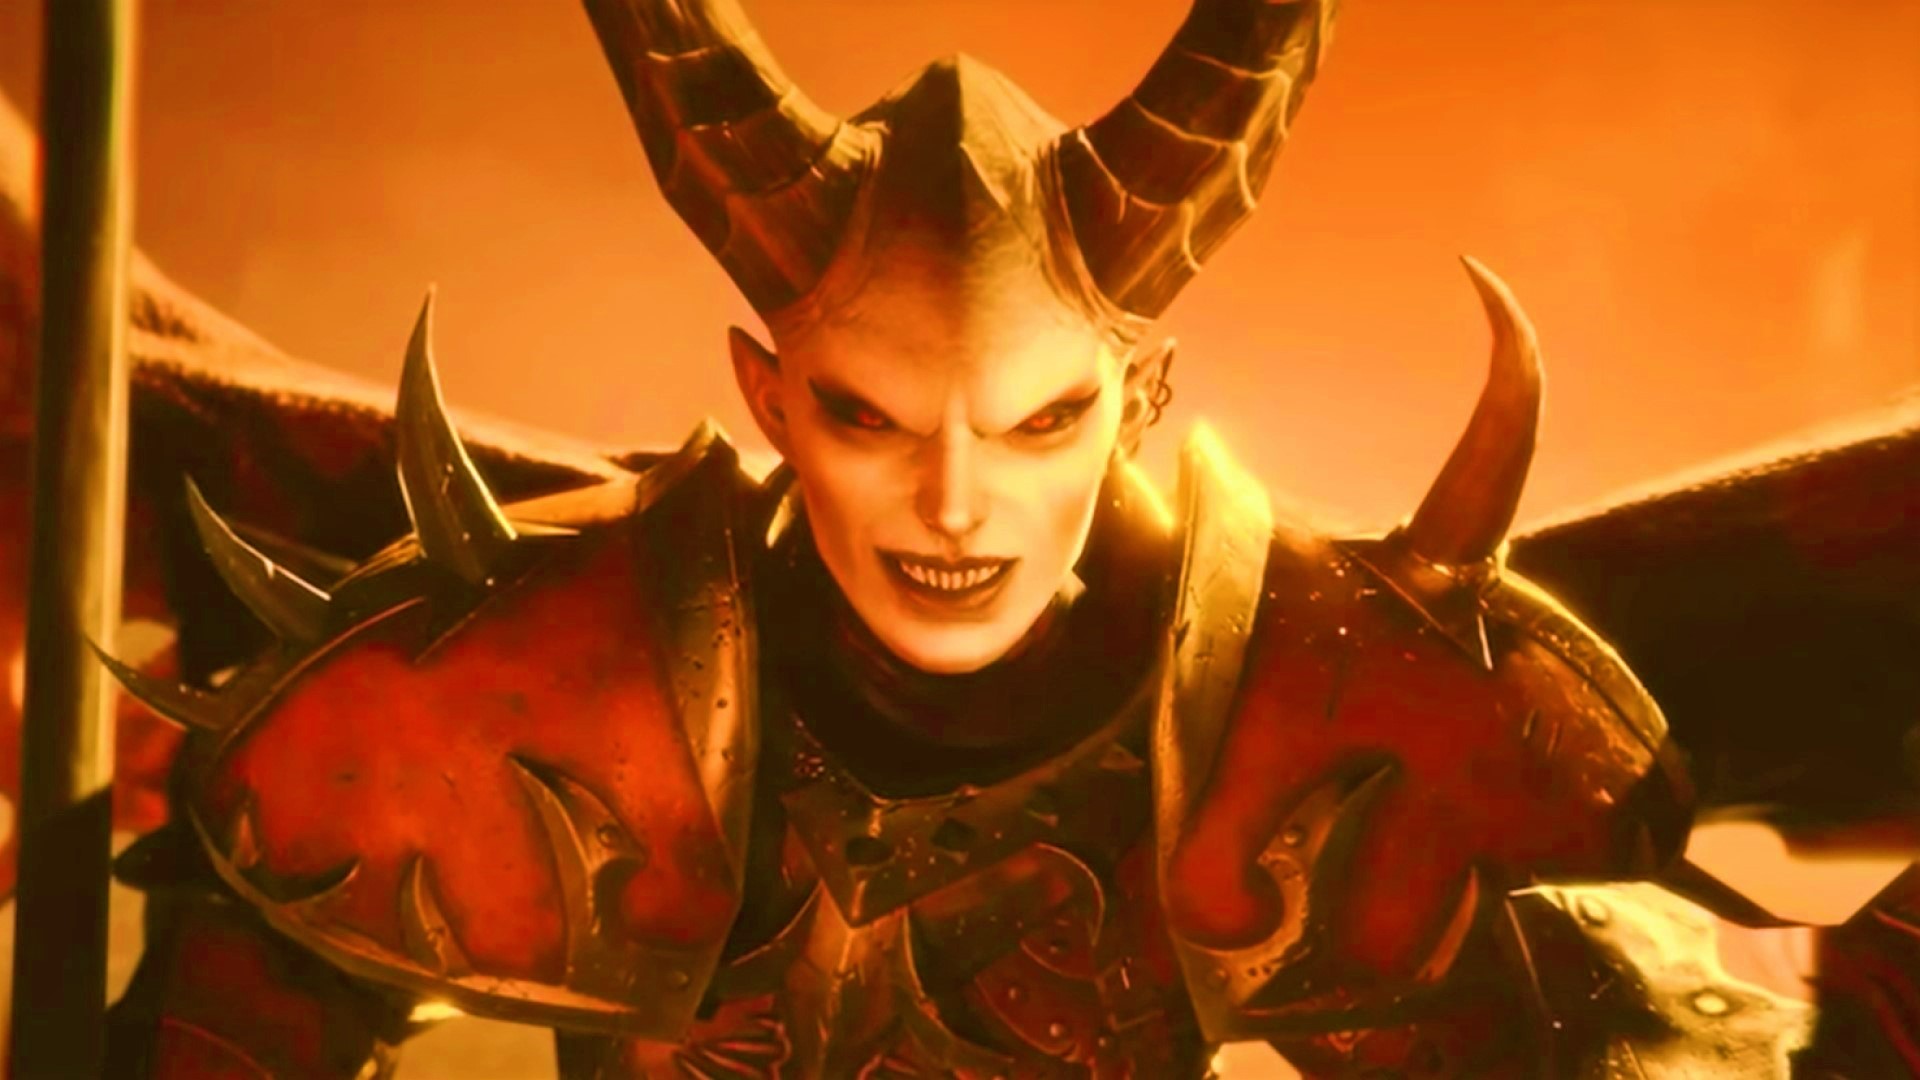 Valkia the Bloody comes out to slay in Total Warhammer 3 DLC | Wargamer